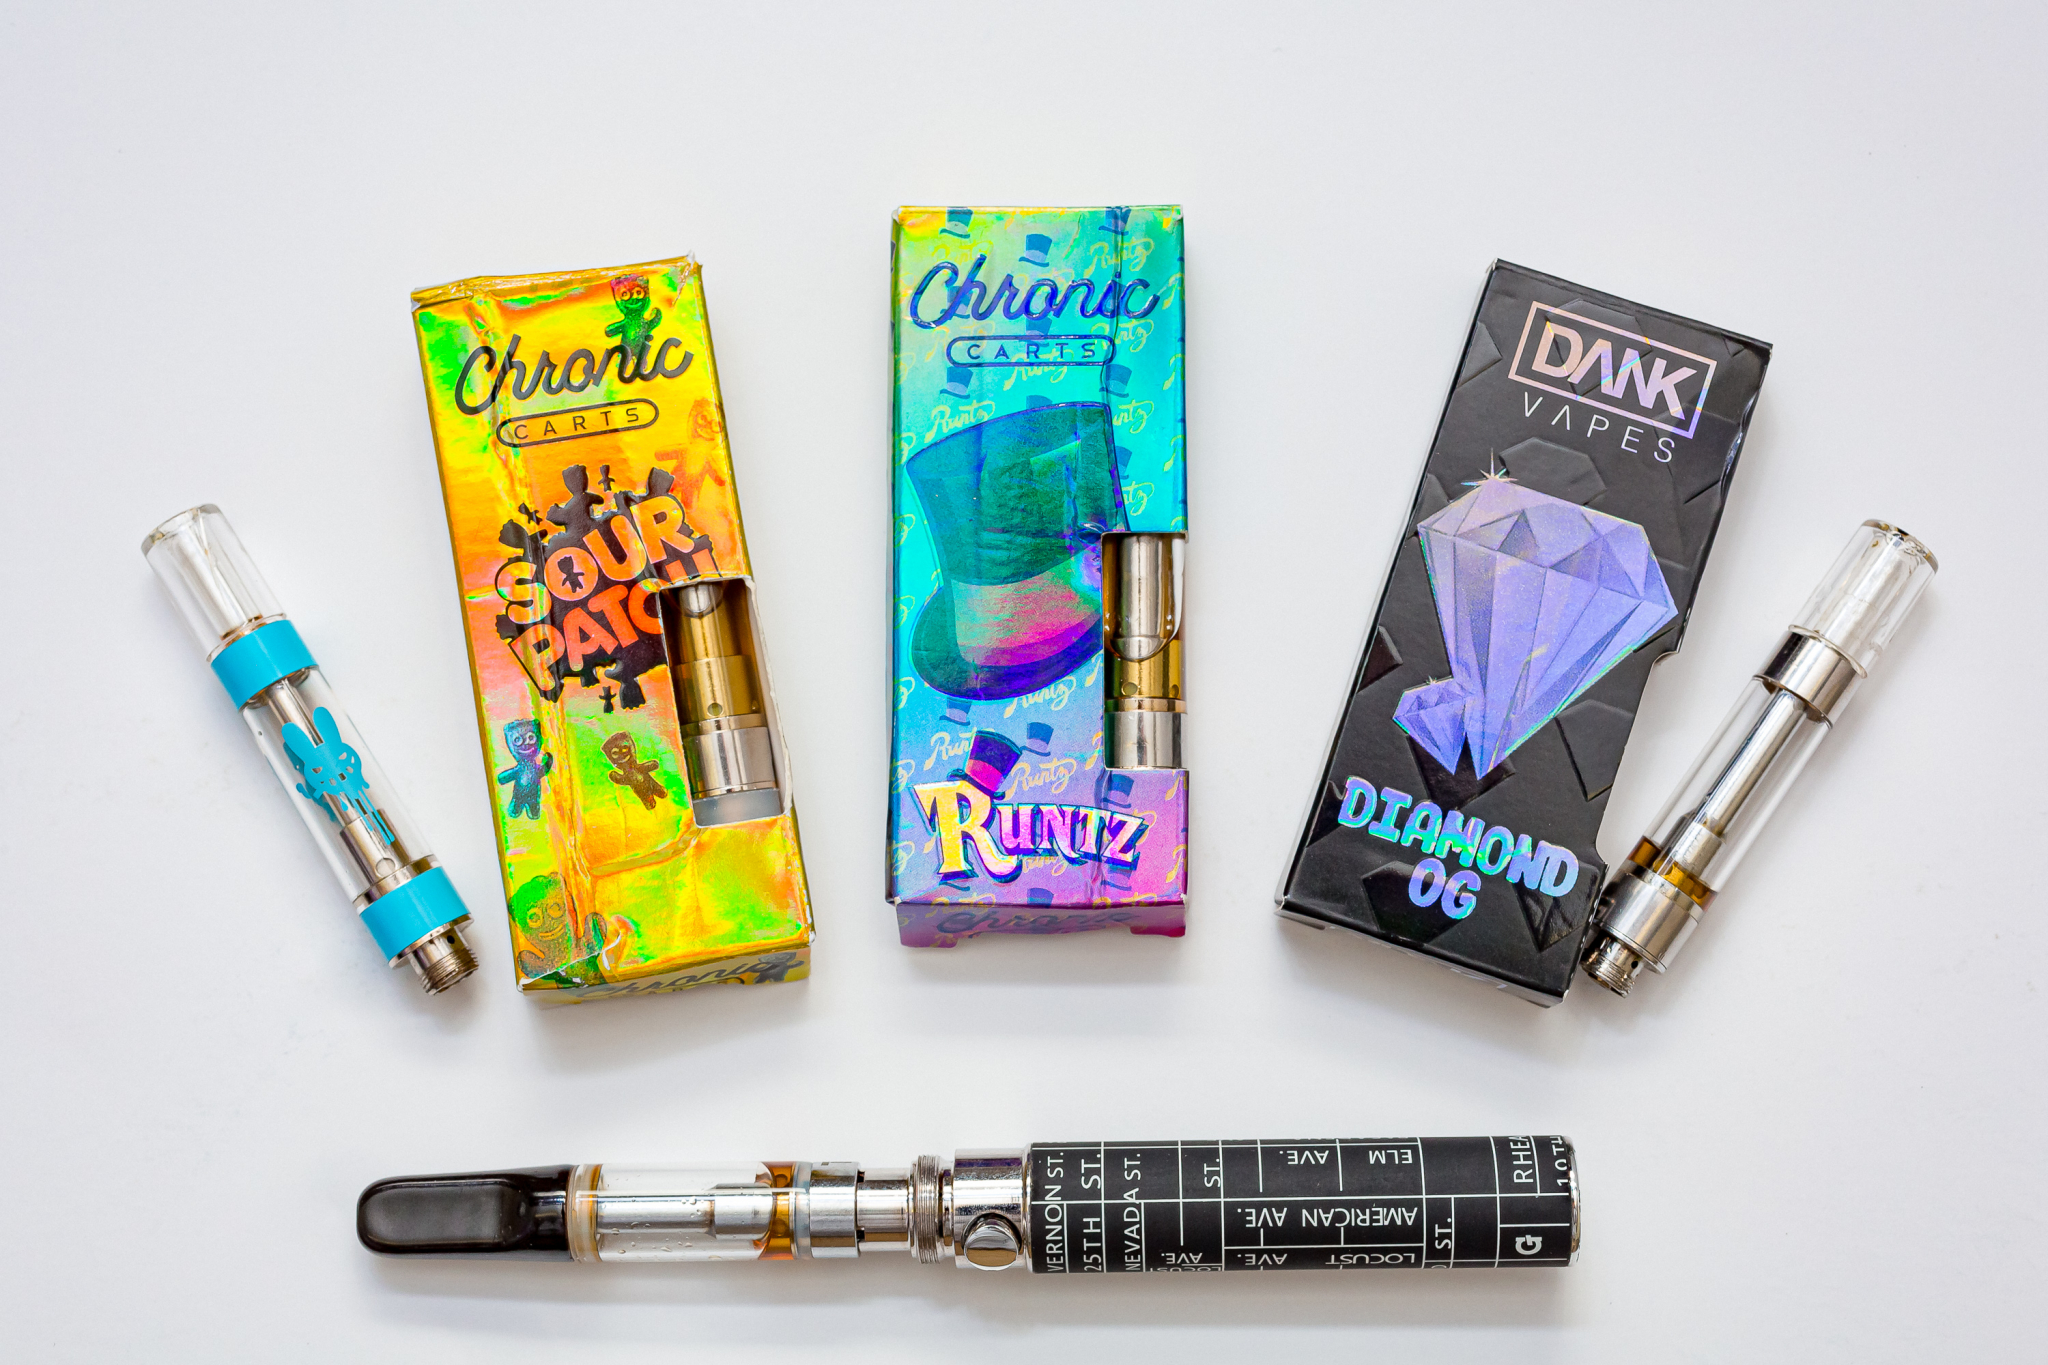 CDC says vitamin E acetate is potential culprit in vaping illnesses